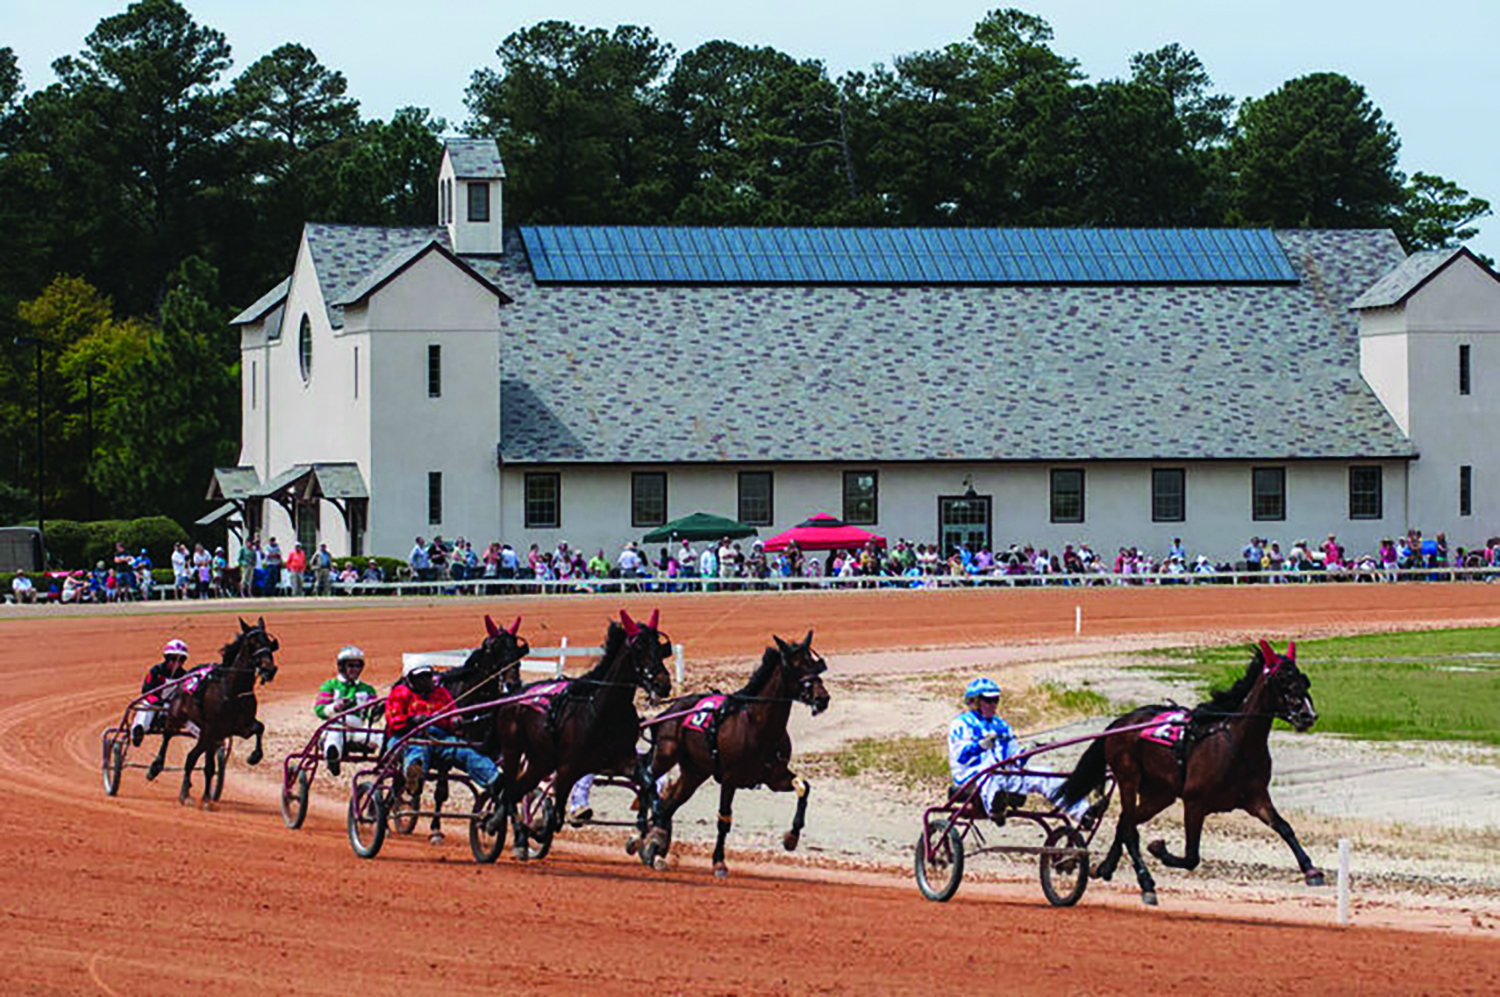 trotters at harness track in Pinehurst